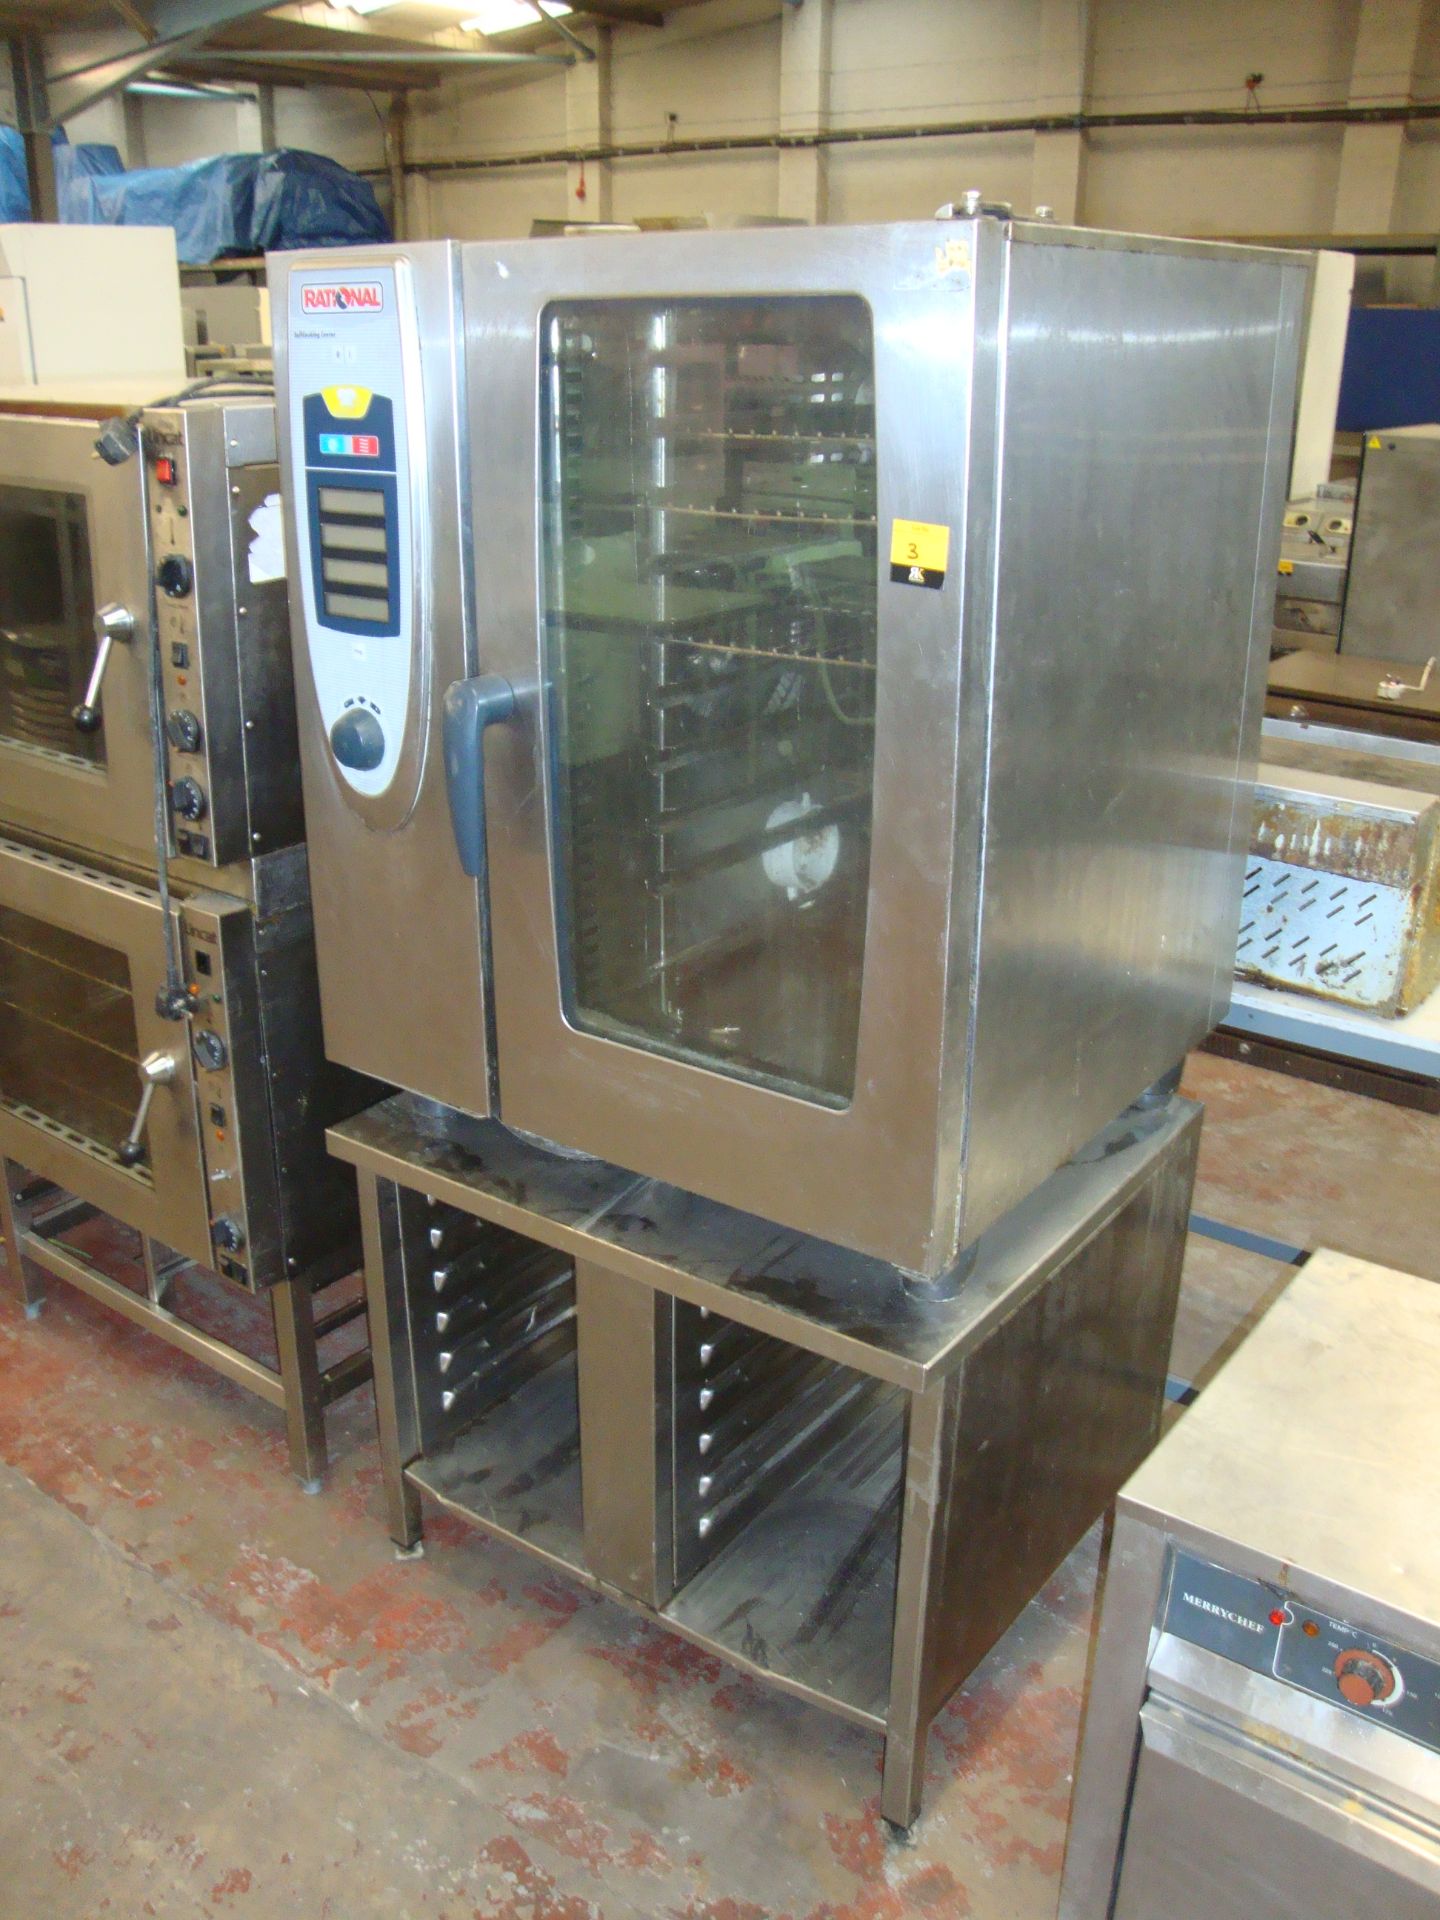 Rational self-cooking center model SCC101, on tray stand